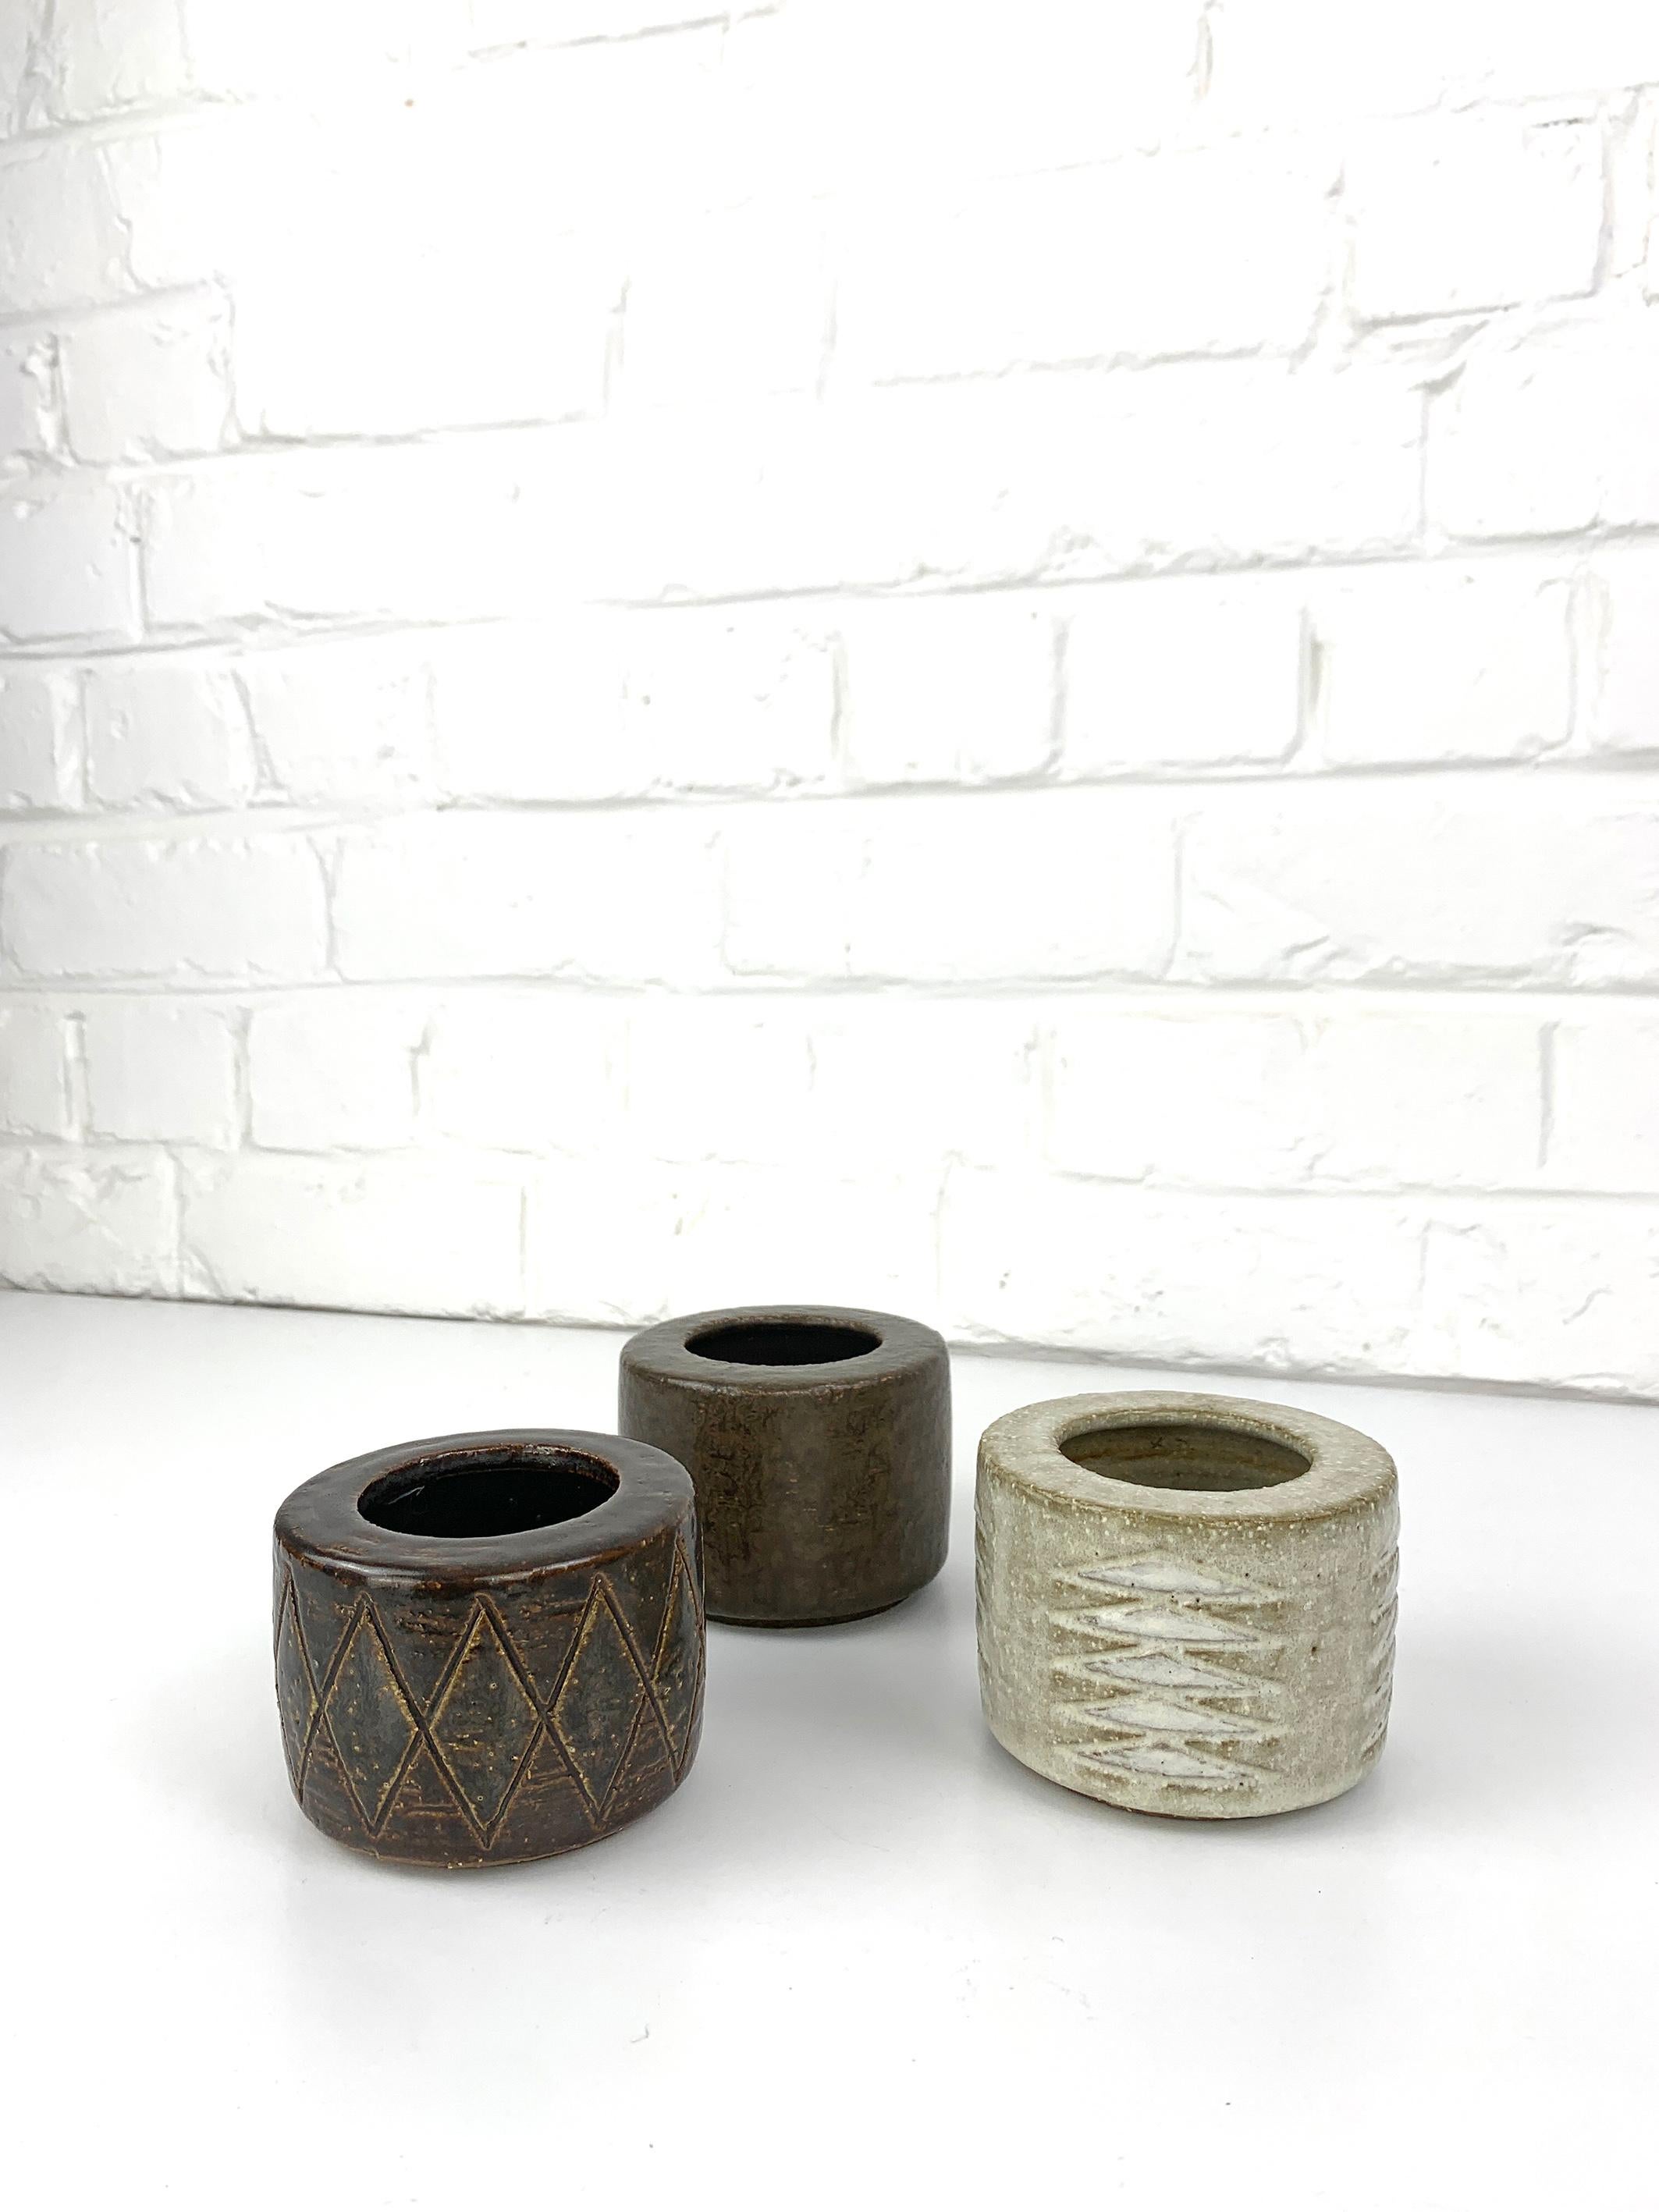 Set of 3 ceramic vases in beige-brown earth tones. They come with a discrete glaze. Scandinavian Mid-Century ceramic. 

Produced in the 1960s by Palshus (Denmark), founded by Per and his wife Annelise Linnemann-Schmidt. The impressed patterns on two